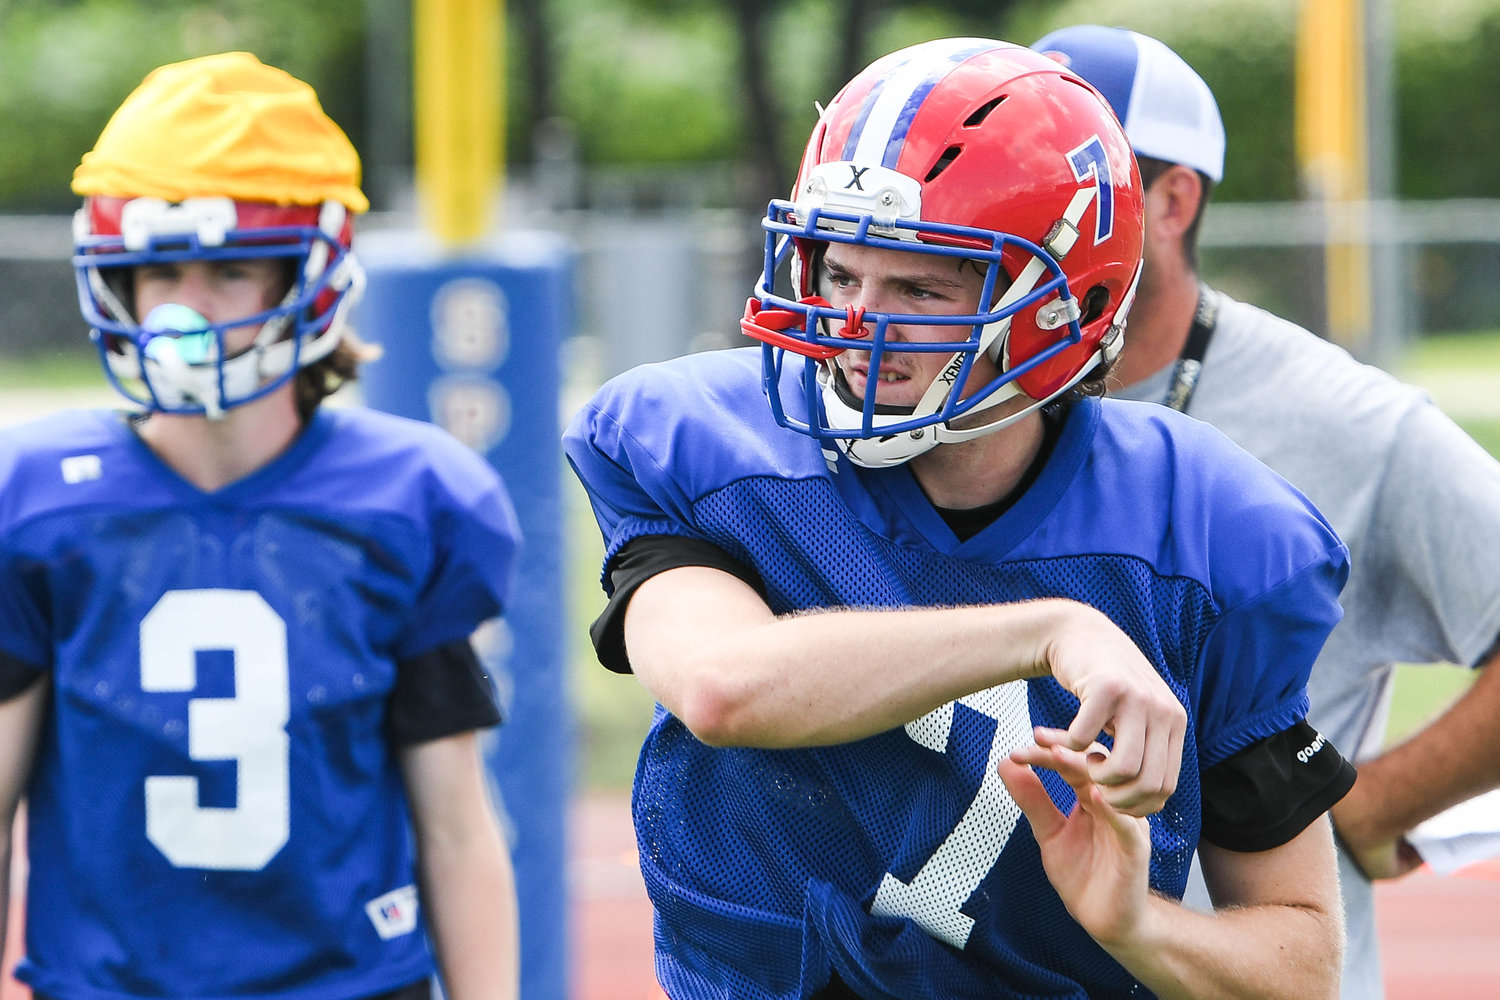 New Hartford quarterback Dominic Ambrose makes a throw during a recent practice. Ambrose was the starting quarterback last season.